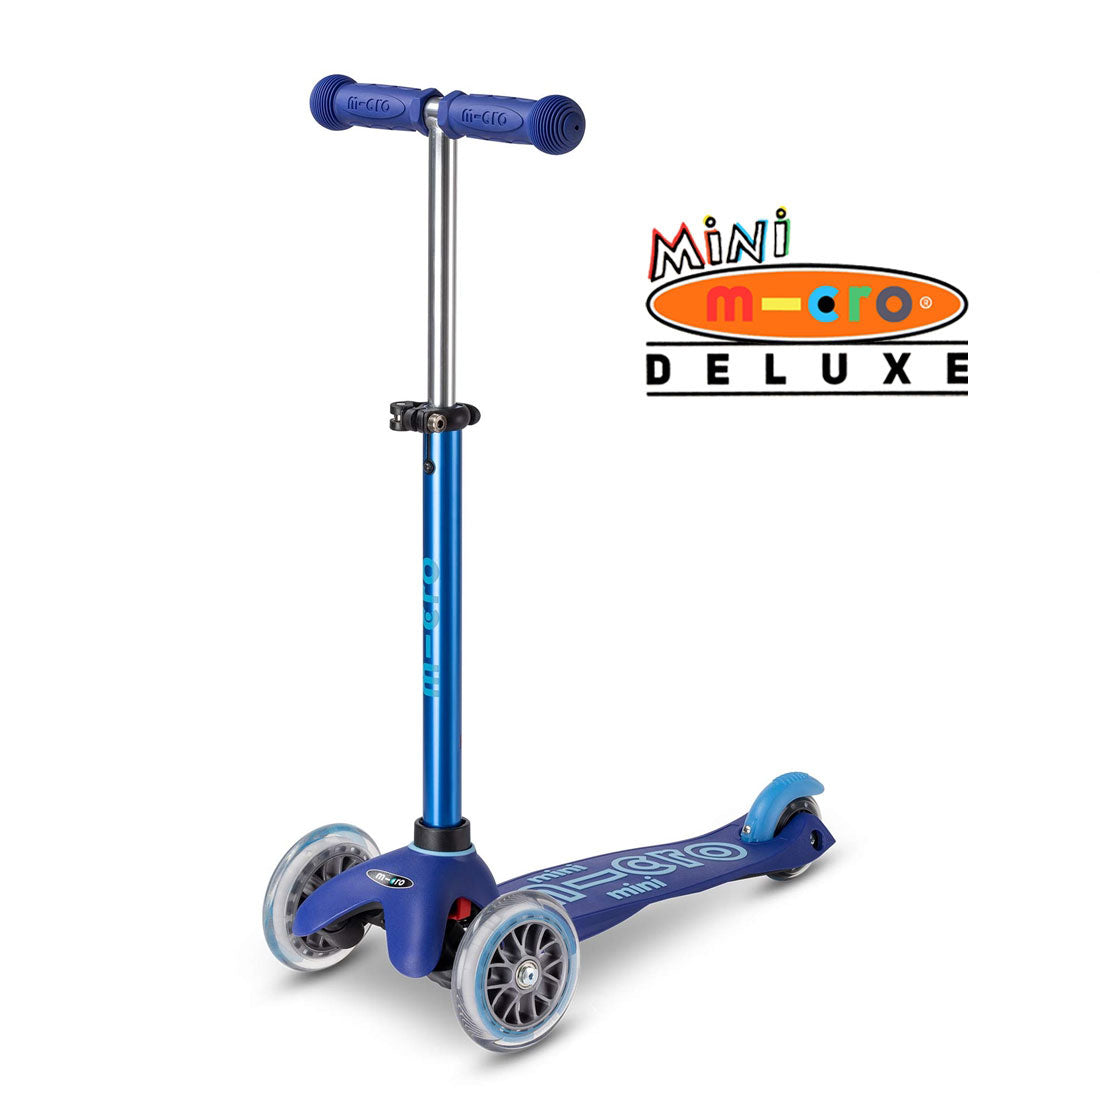 Micro Mini Deluxe Scooter - Blue Scooter Completes Rec